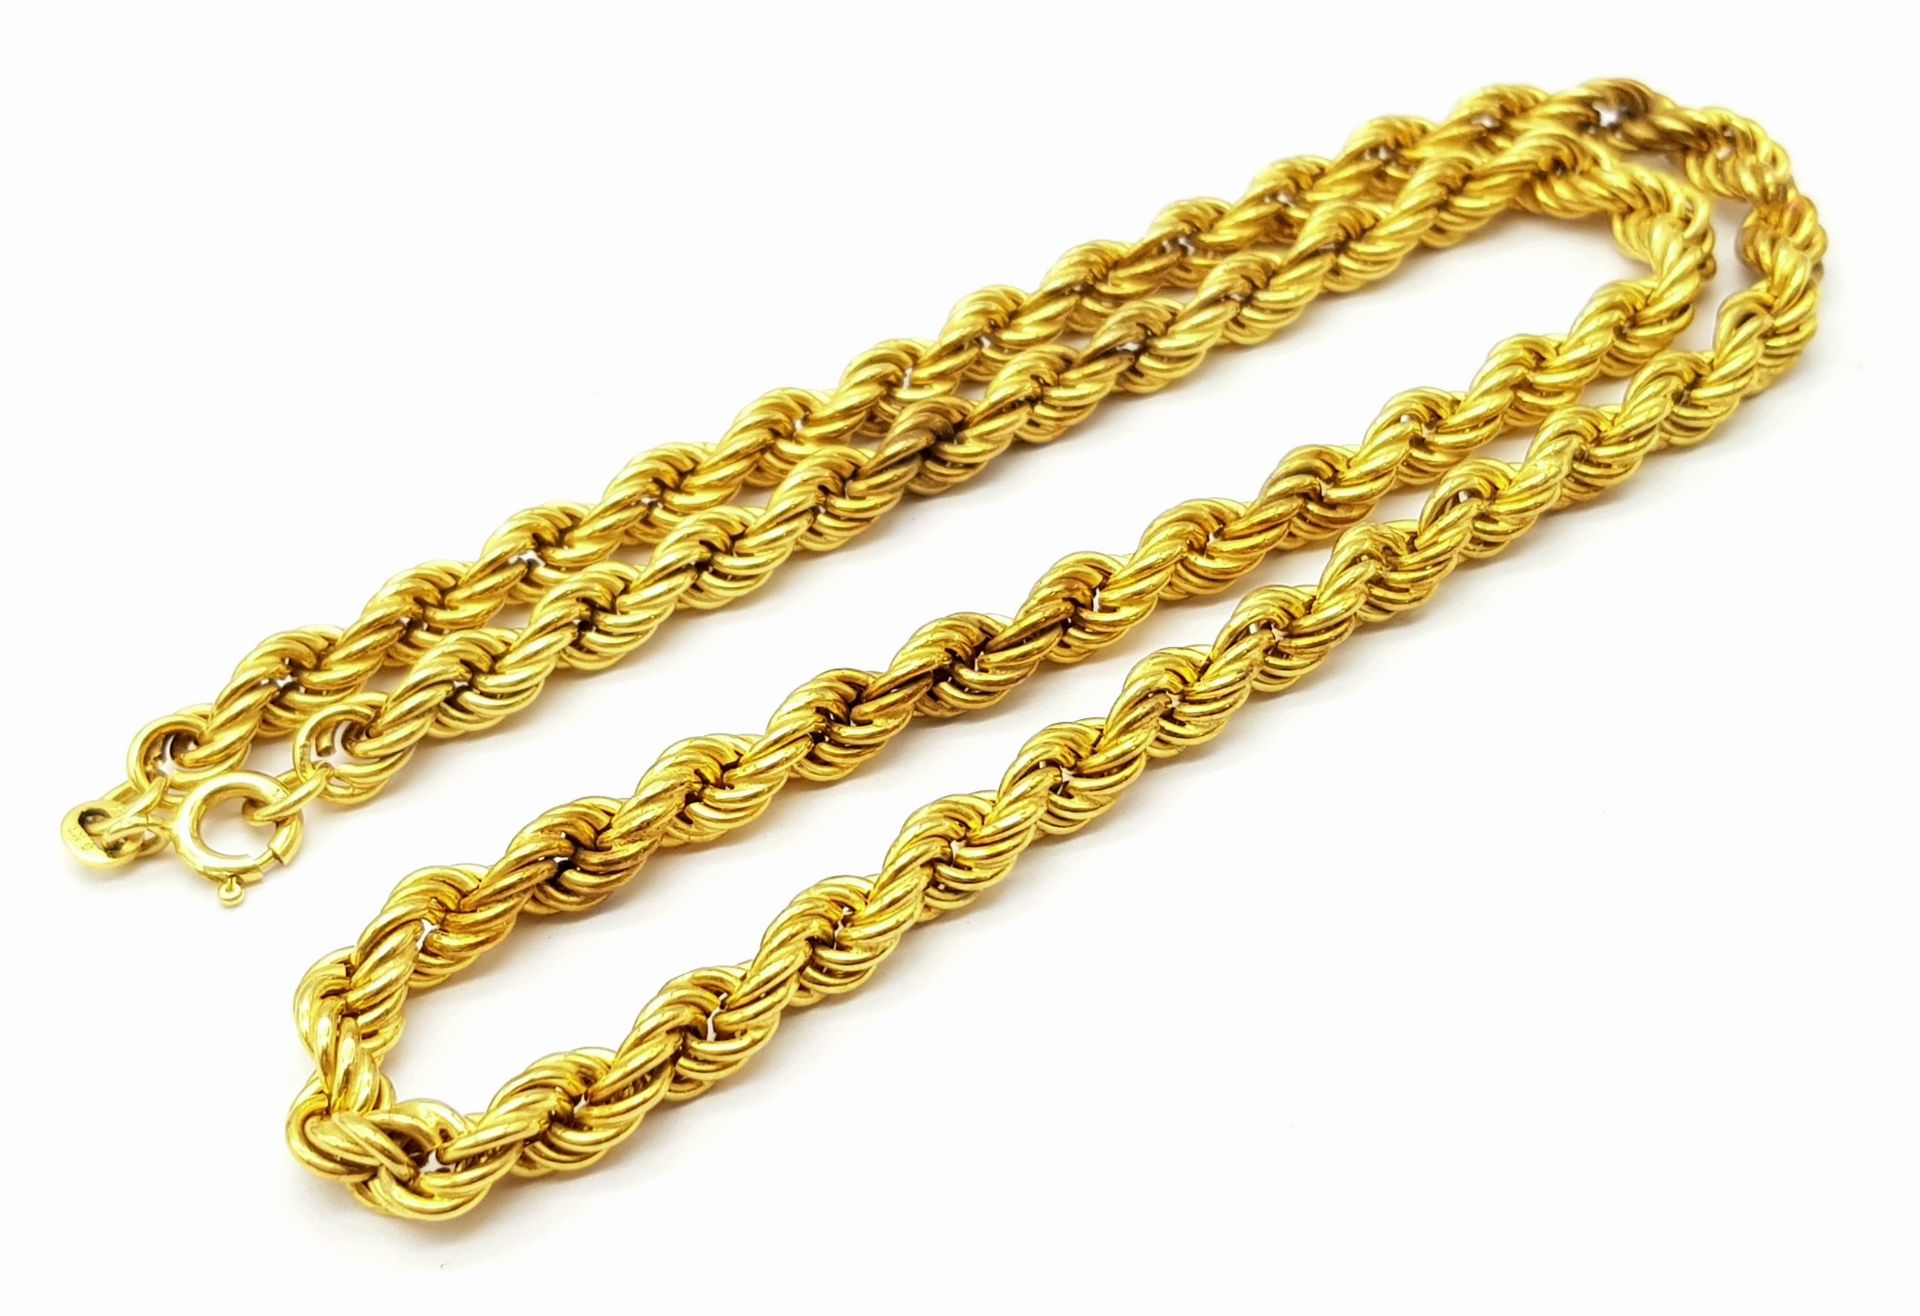 A 9K Yellow Gold Rope Necklace. 45cm length. 12.4g weight. - Image 4 of 5